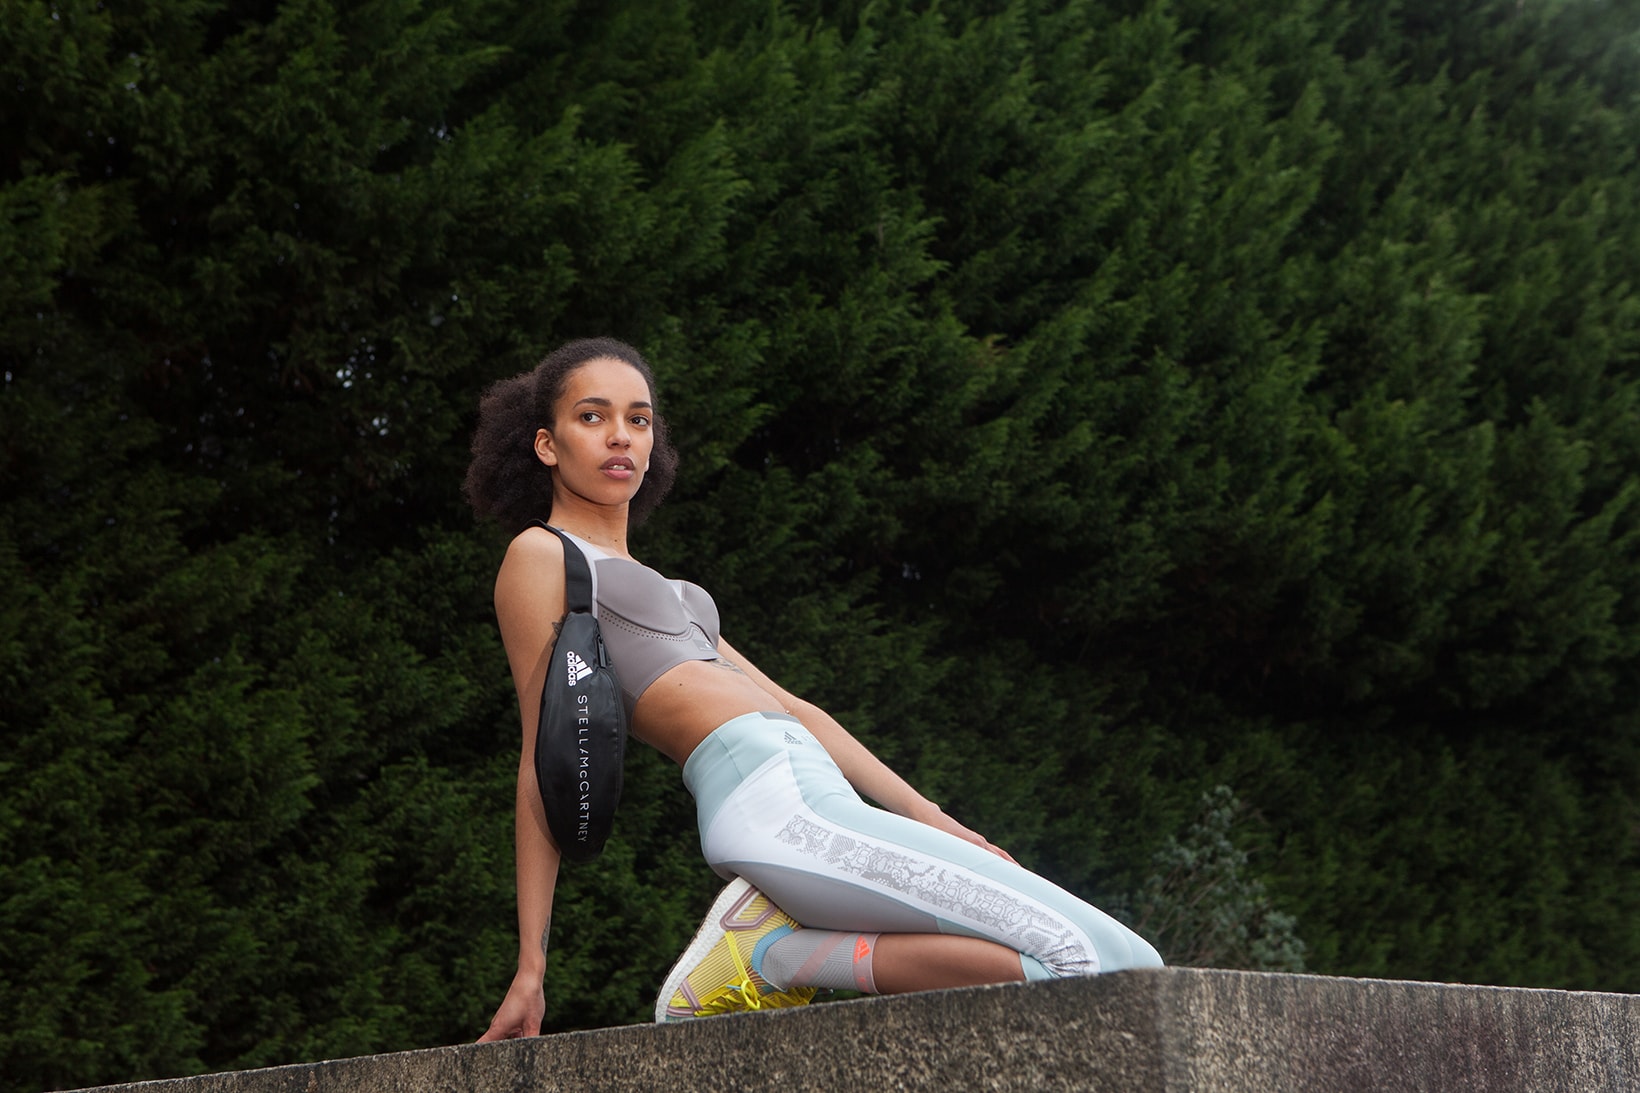 adidas by Stella McCartney Active Wear Collections Club Collective Boxfit